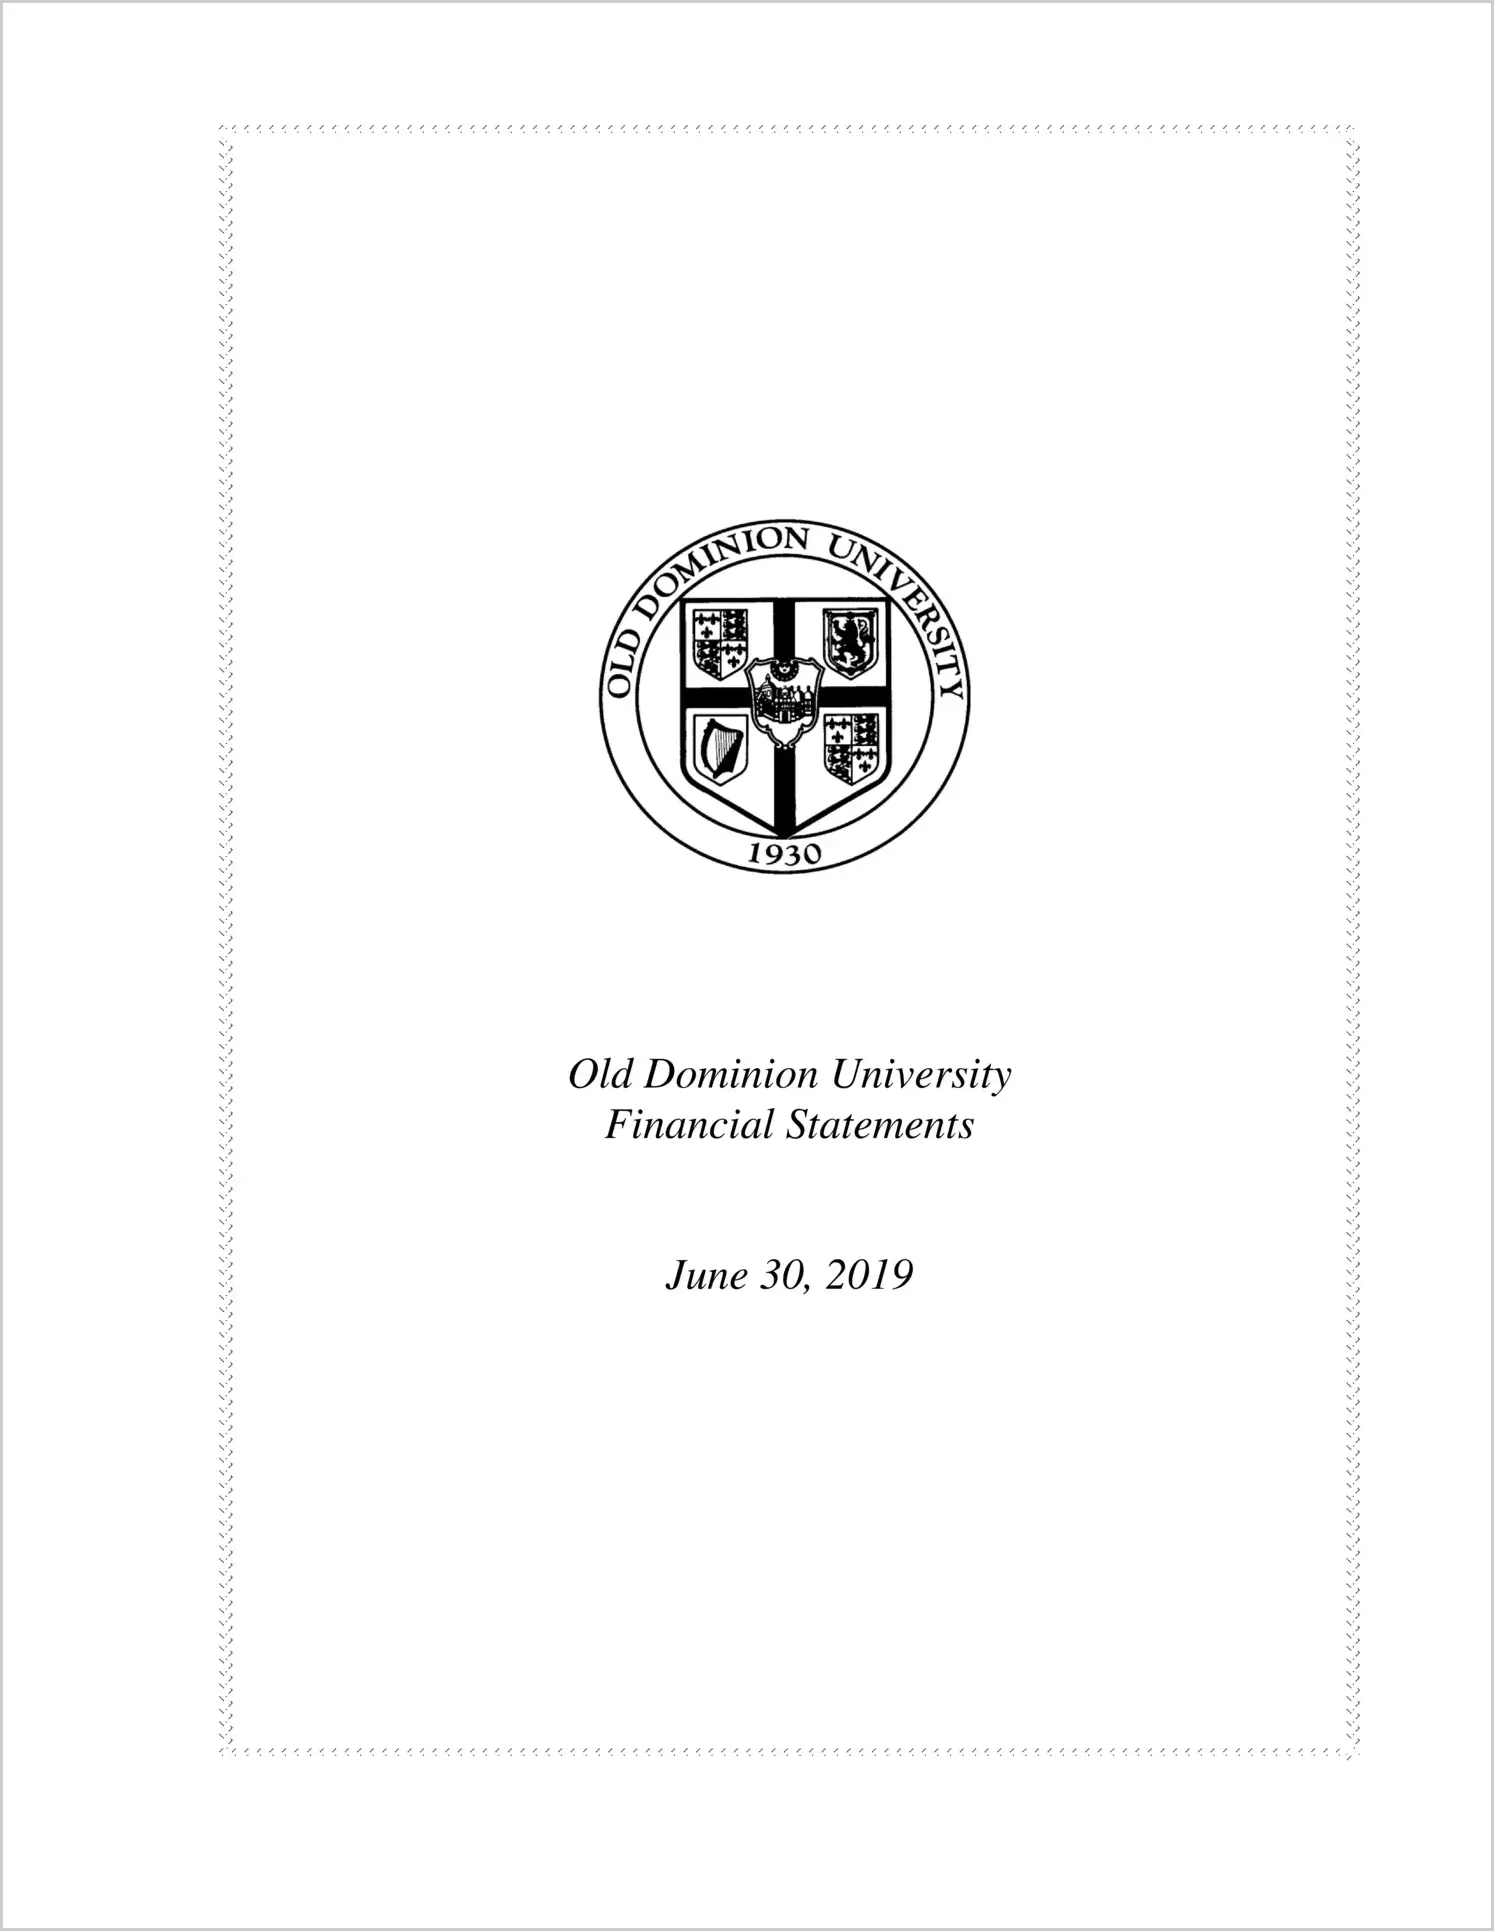 Old Dominion University Financial Statements for the year ended June 30, 2019